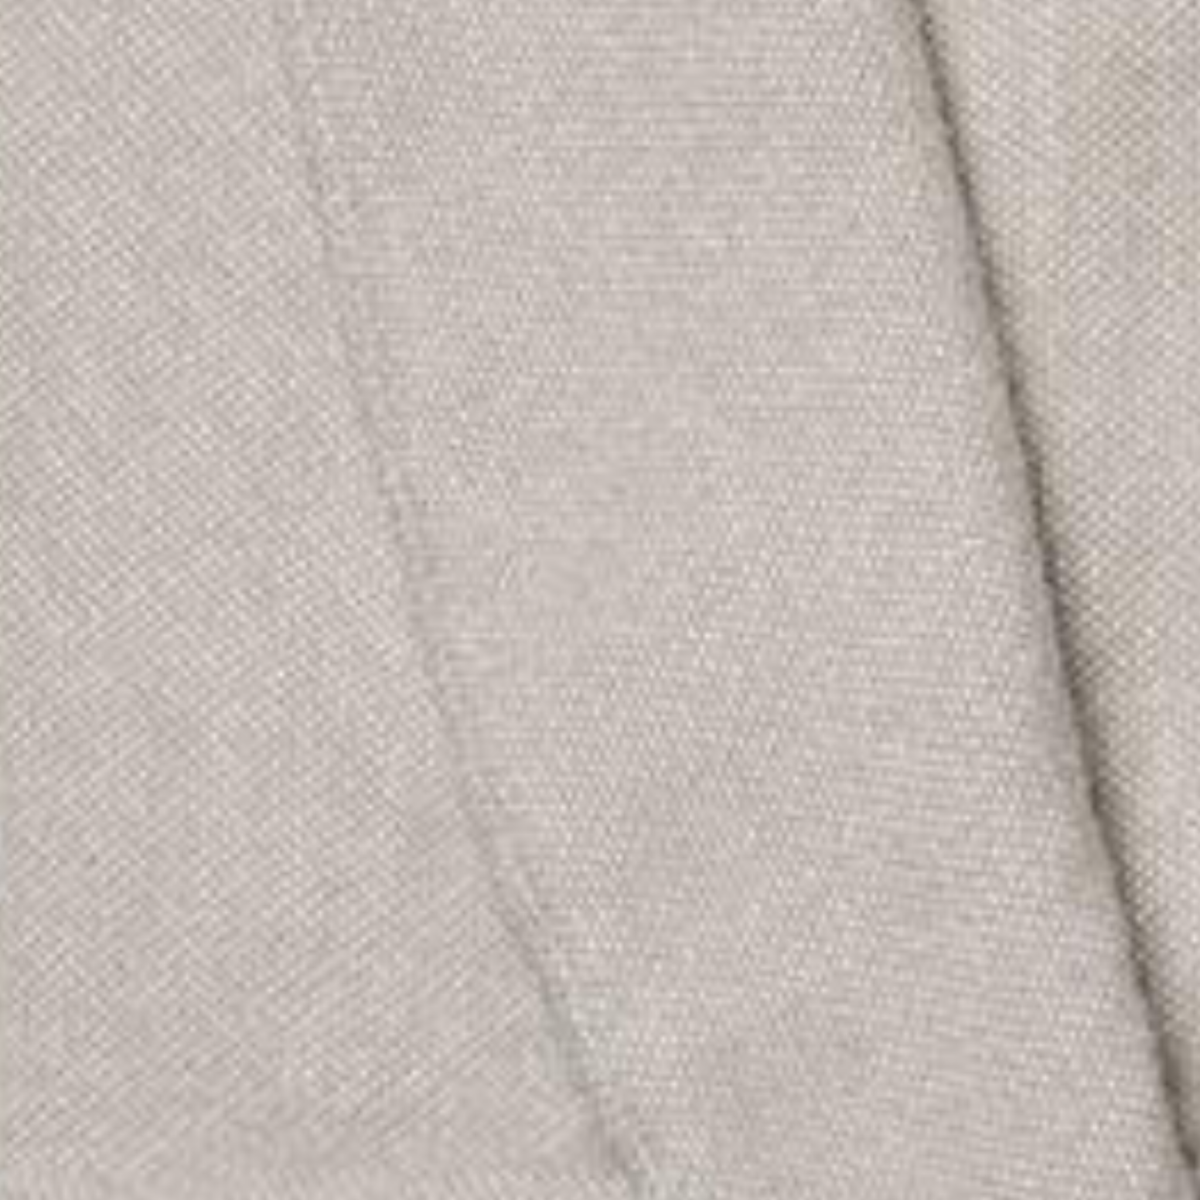 Swatch Sample of Sferra Sardinia’s Cashmere Robes in Grey Color